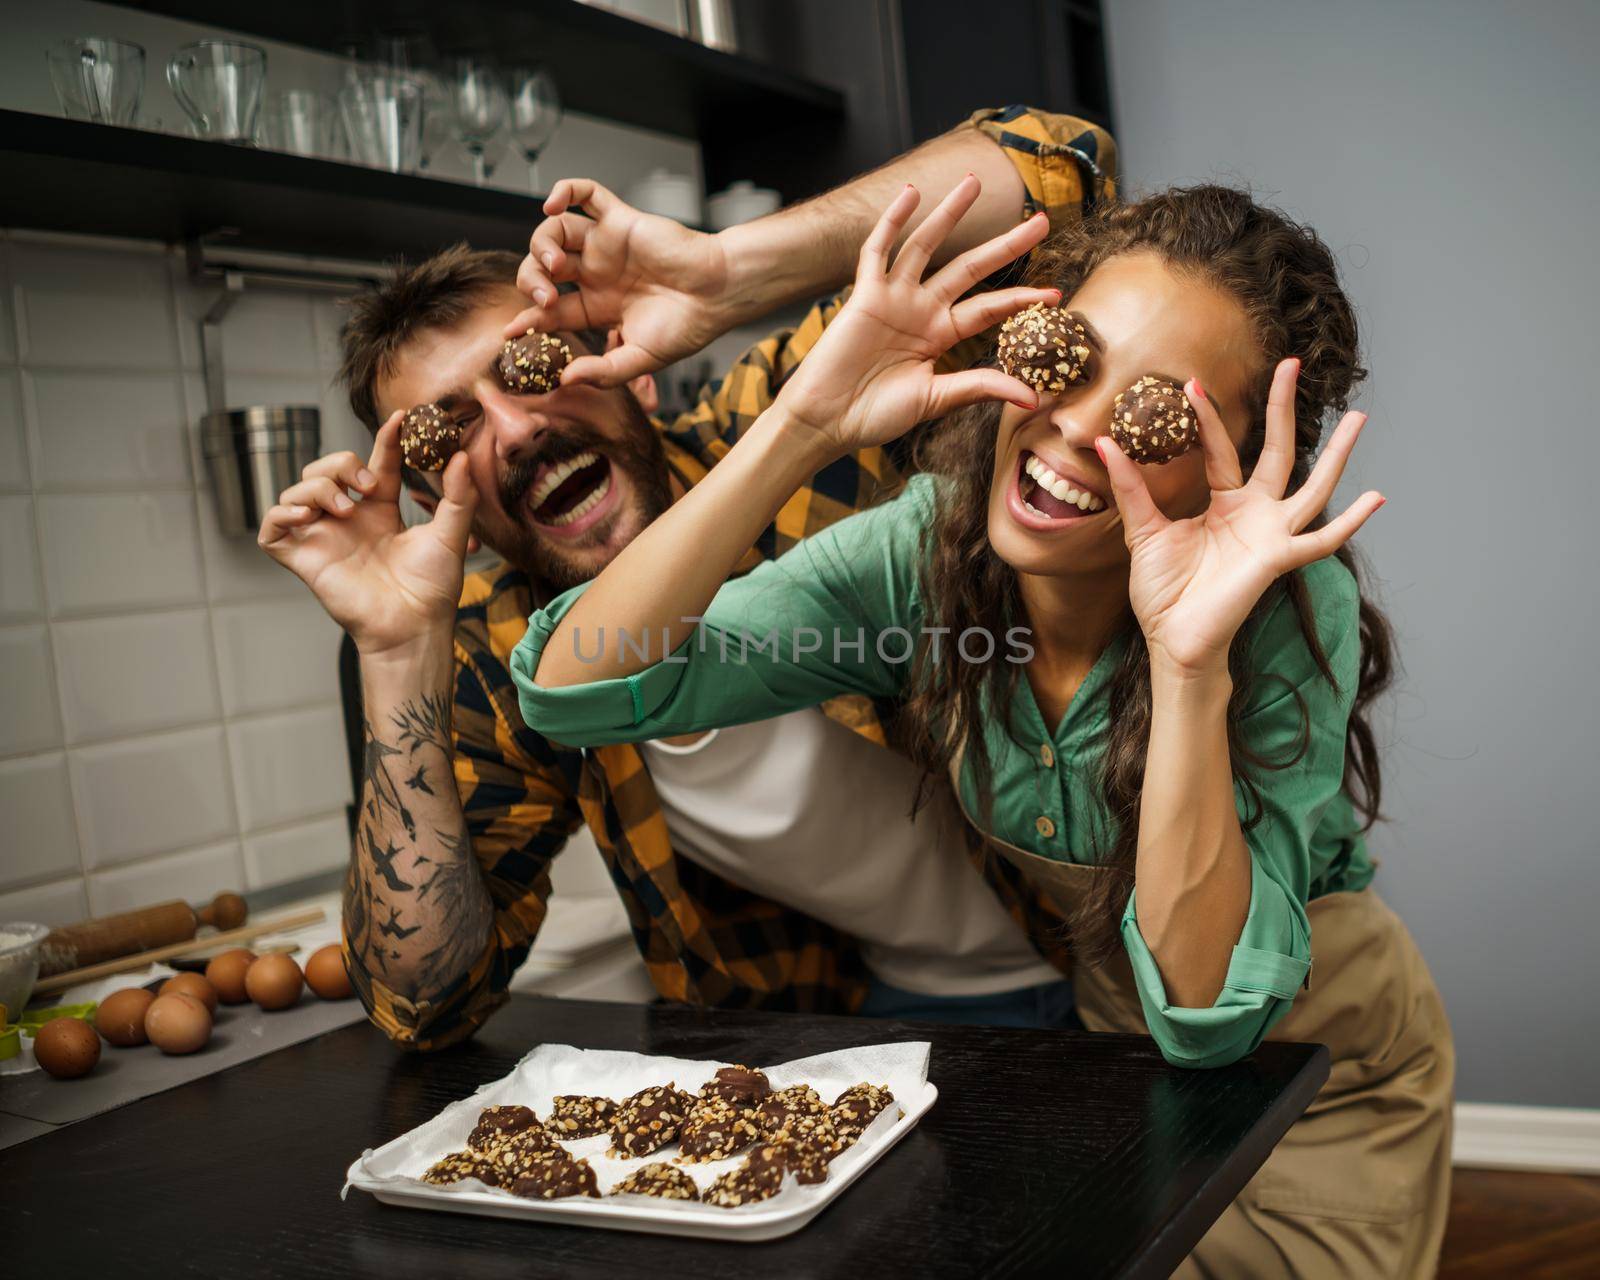 Couple in kitchen by djoronimo